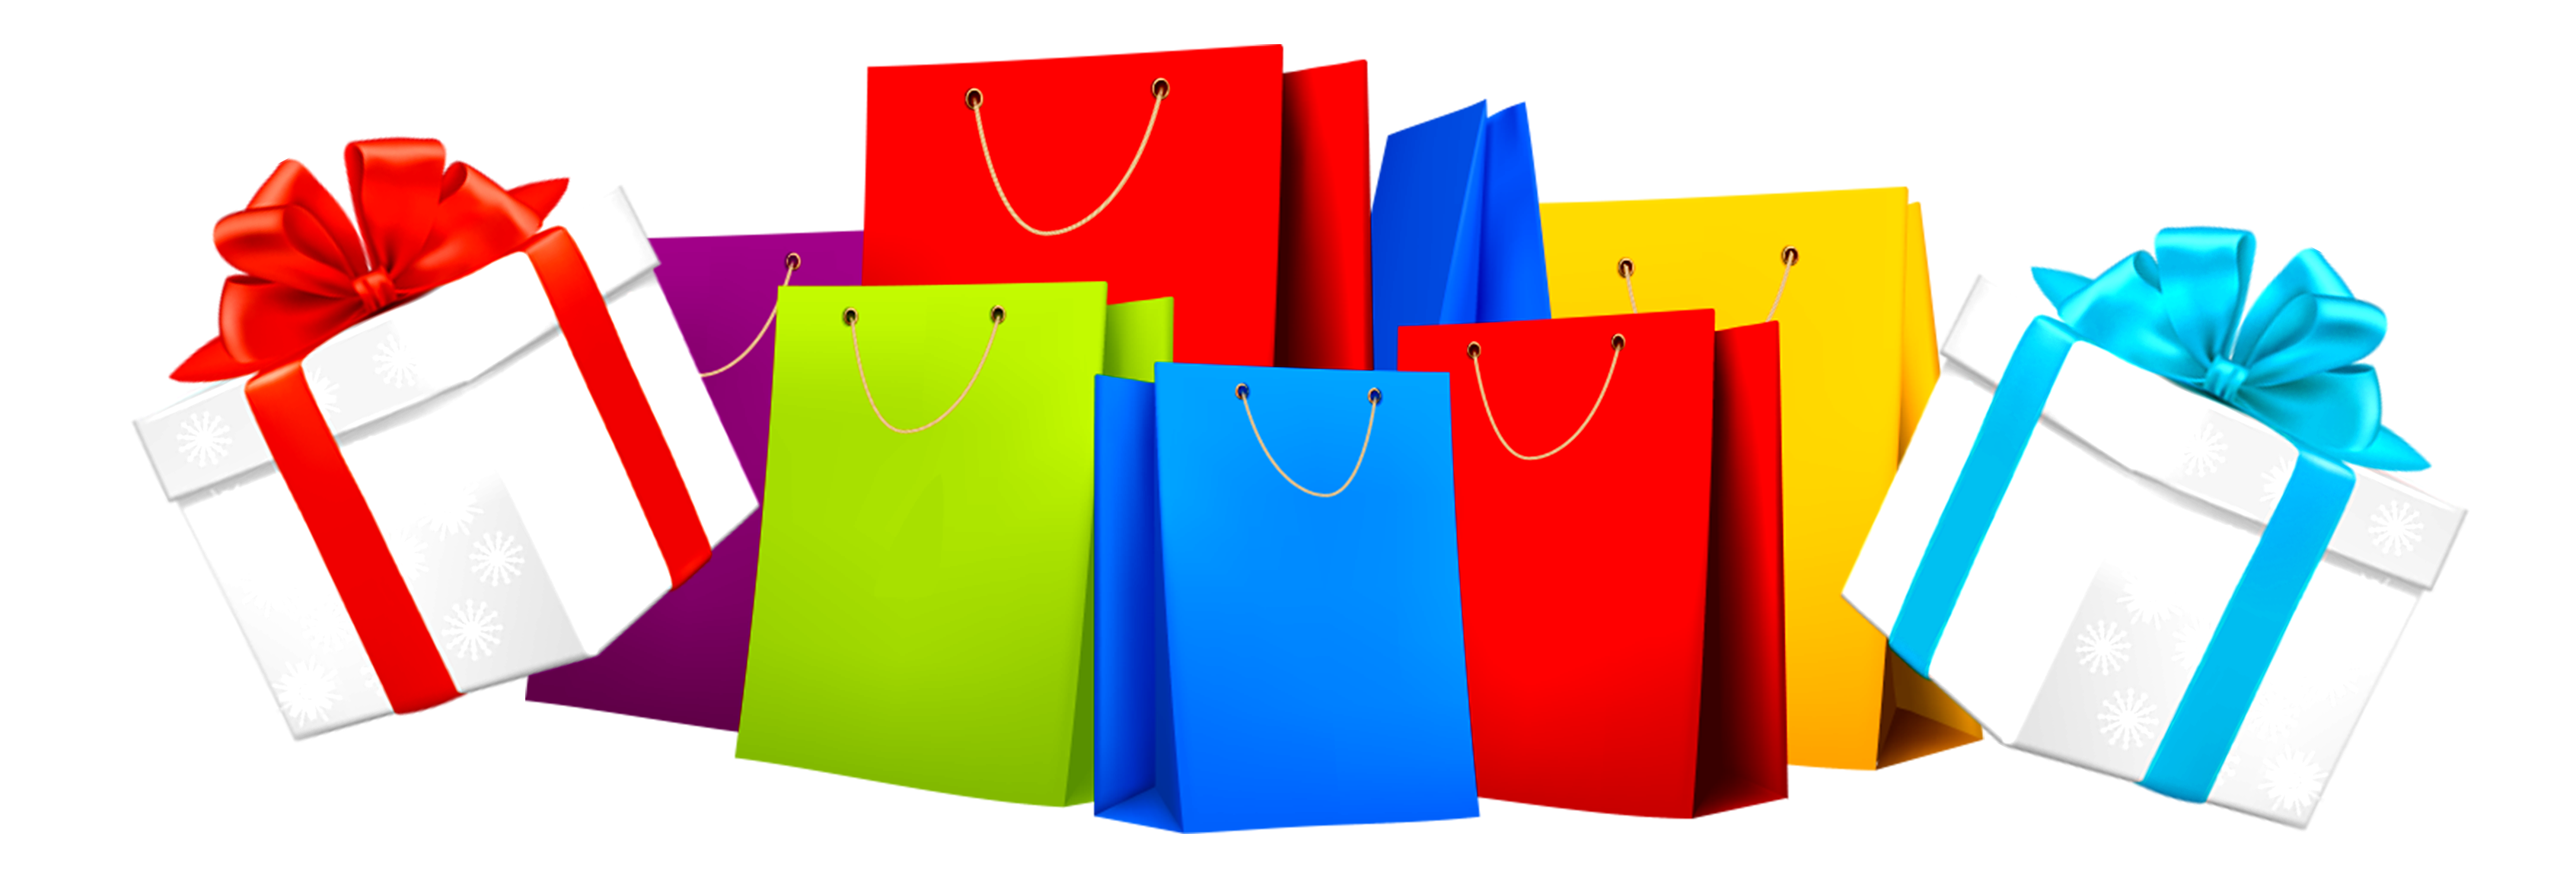 Shopping Bags PNG HD Transparent